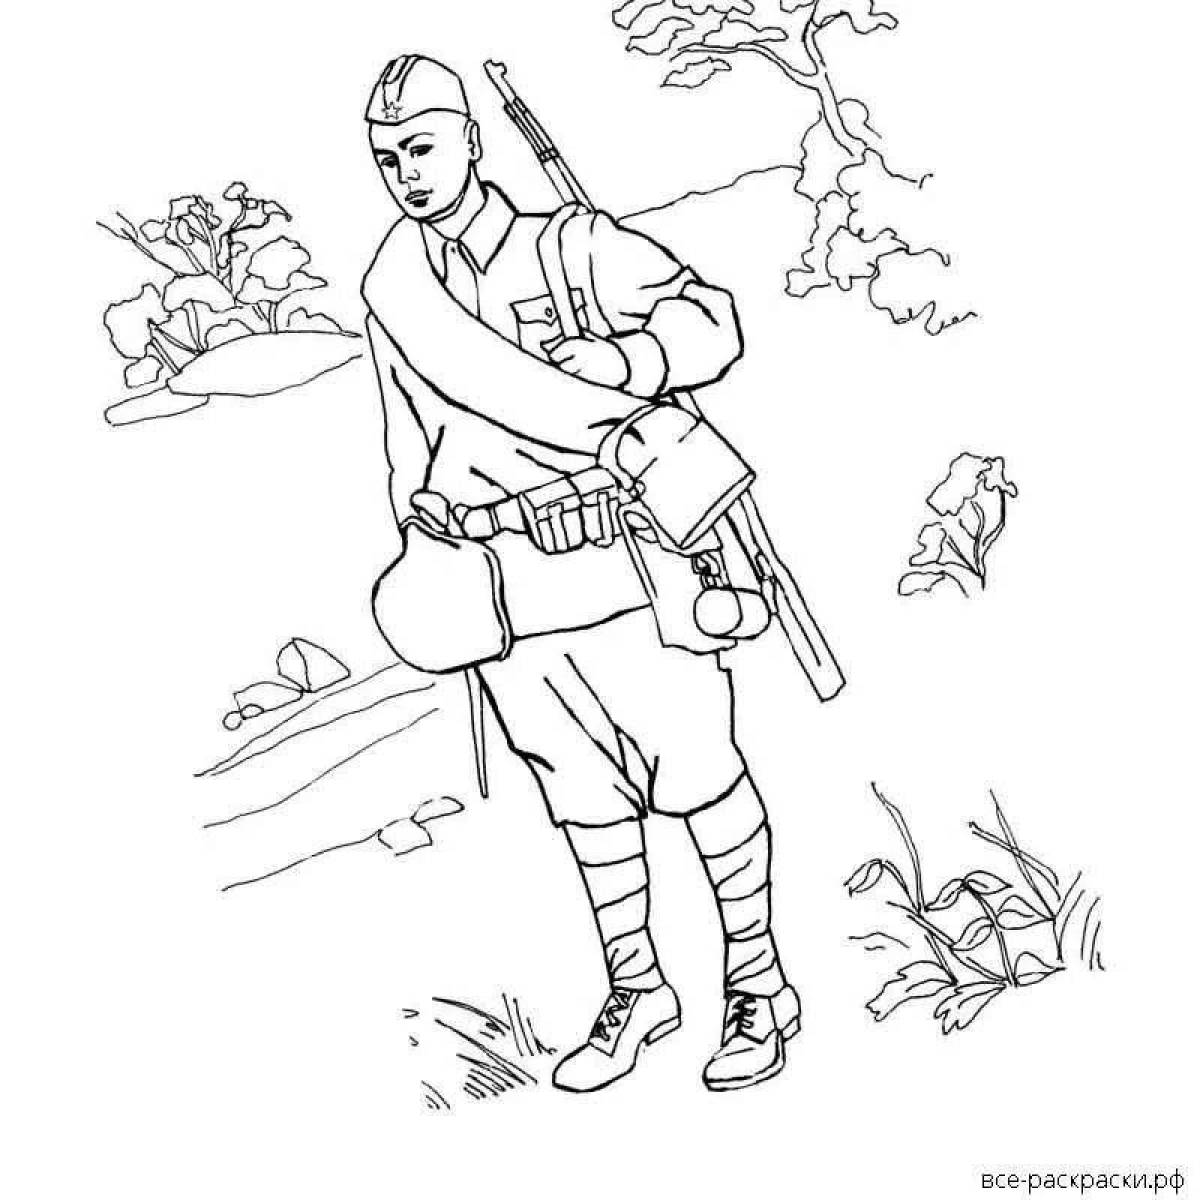 Fun military coloring for school